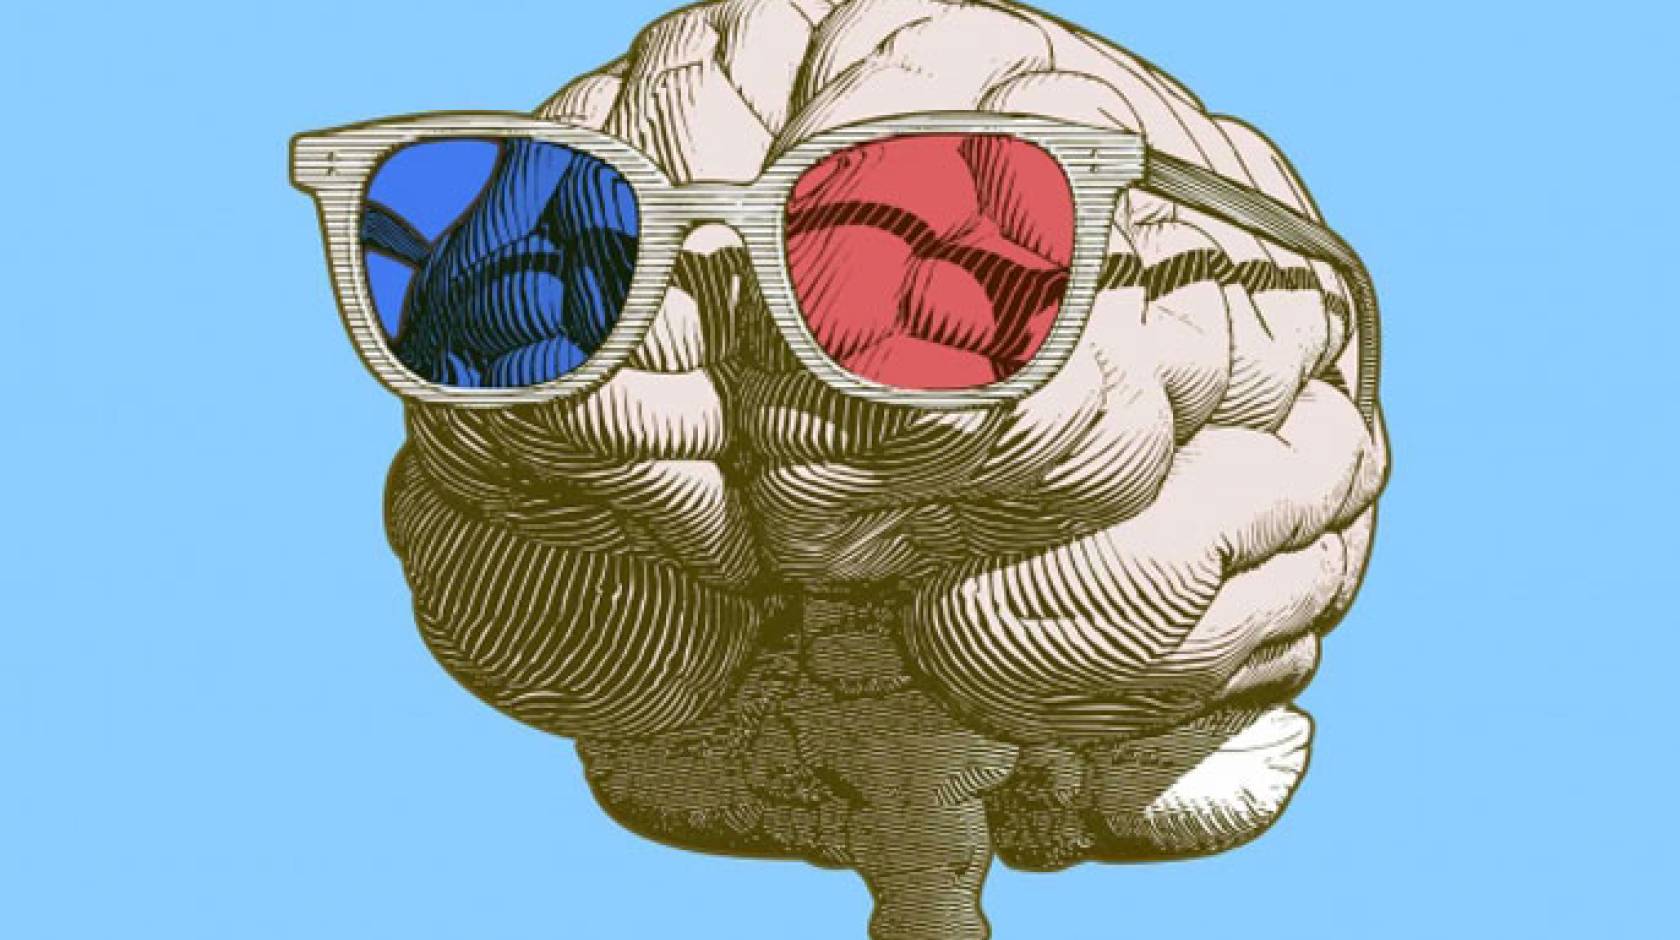 Brain with red and blue sunglasses on